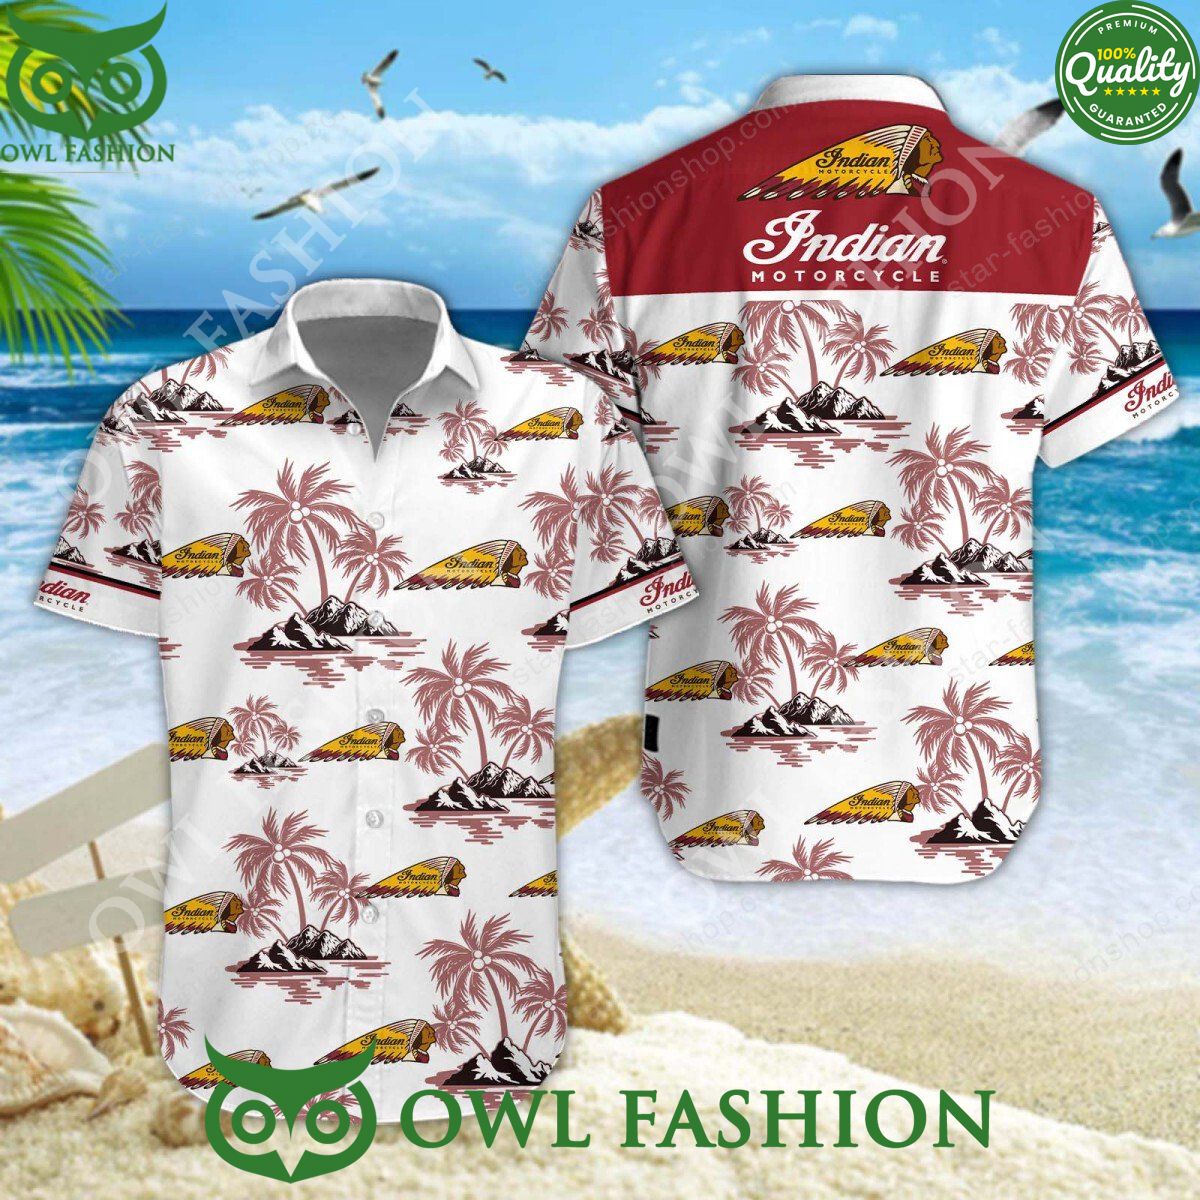 Indian Motorcycle Classic Automobile Brand Limited Hawaiian Shirt and Short